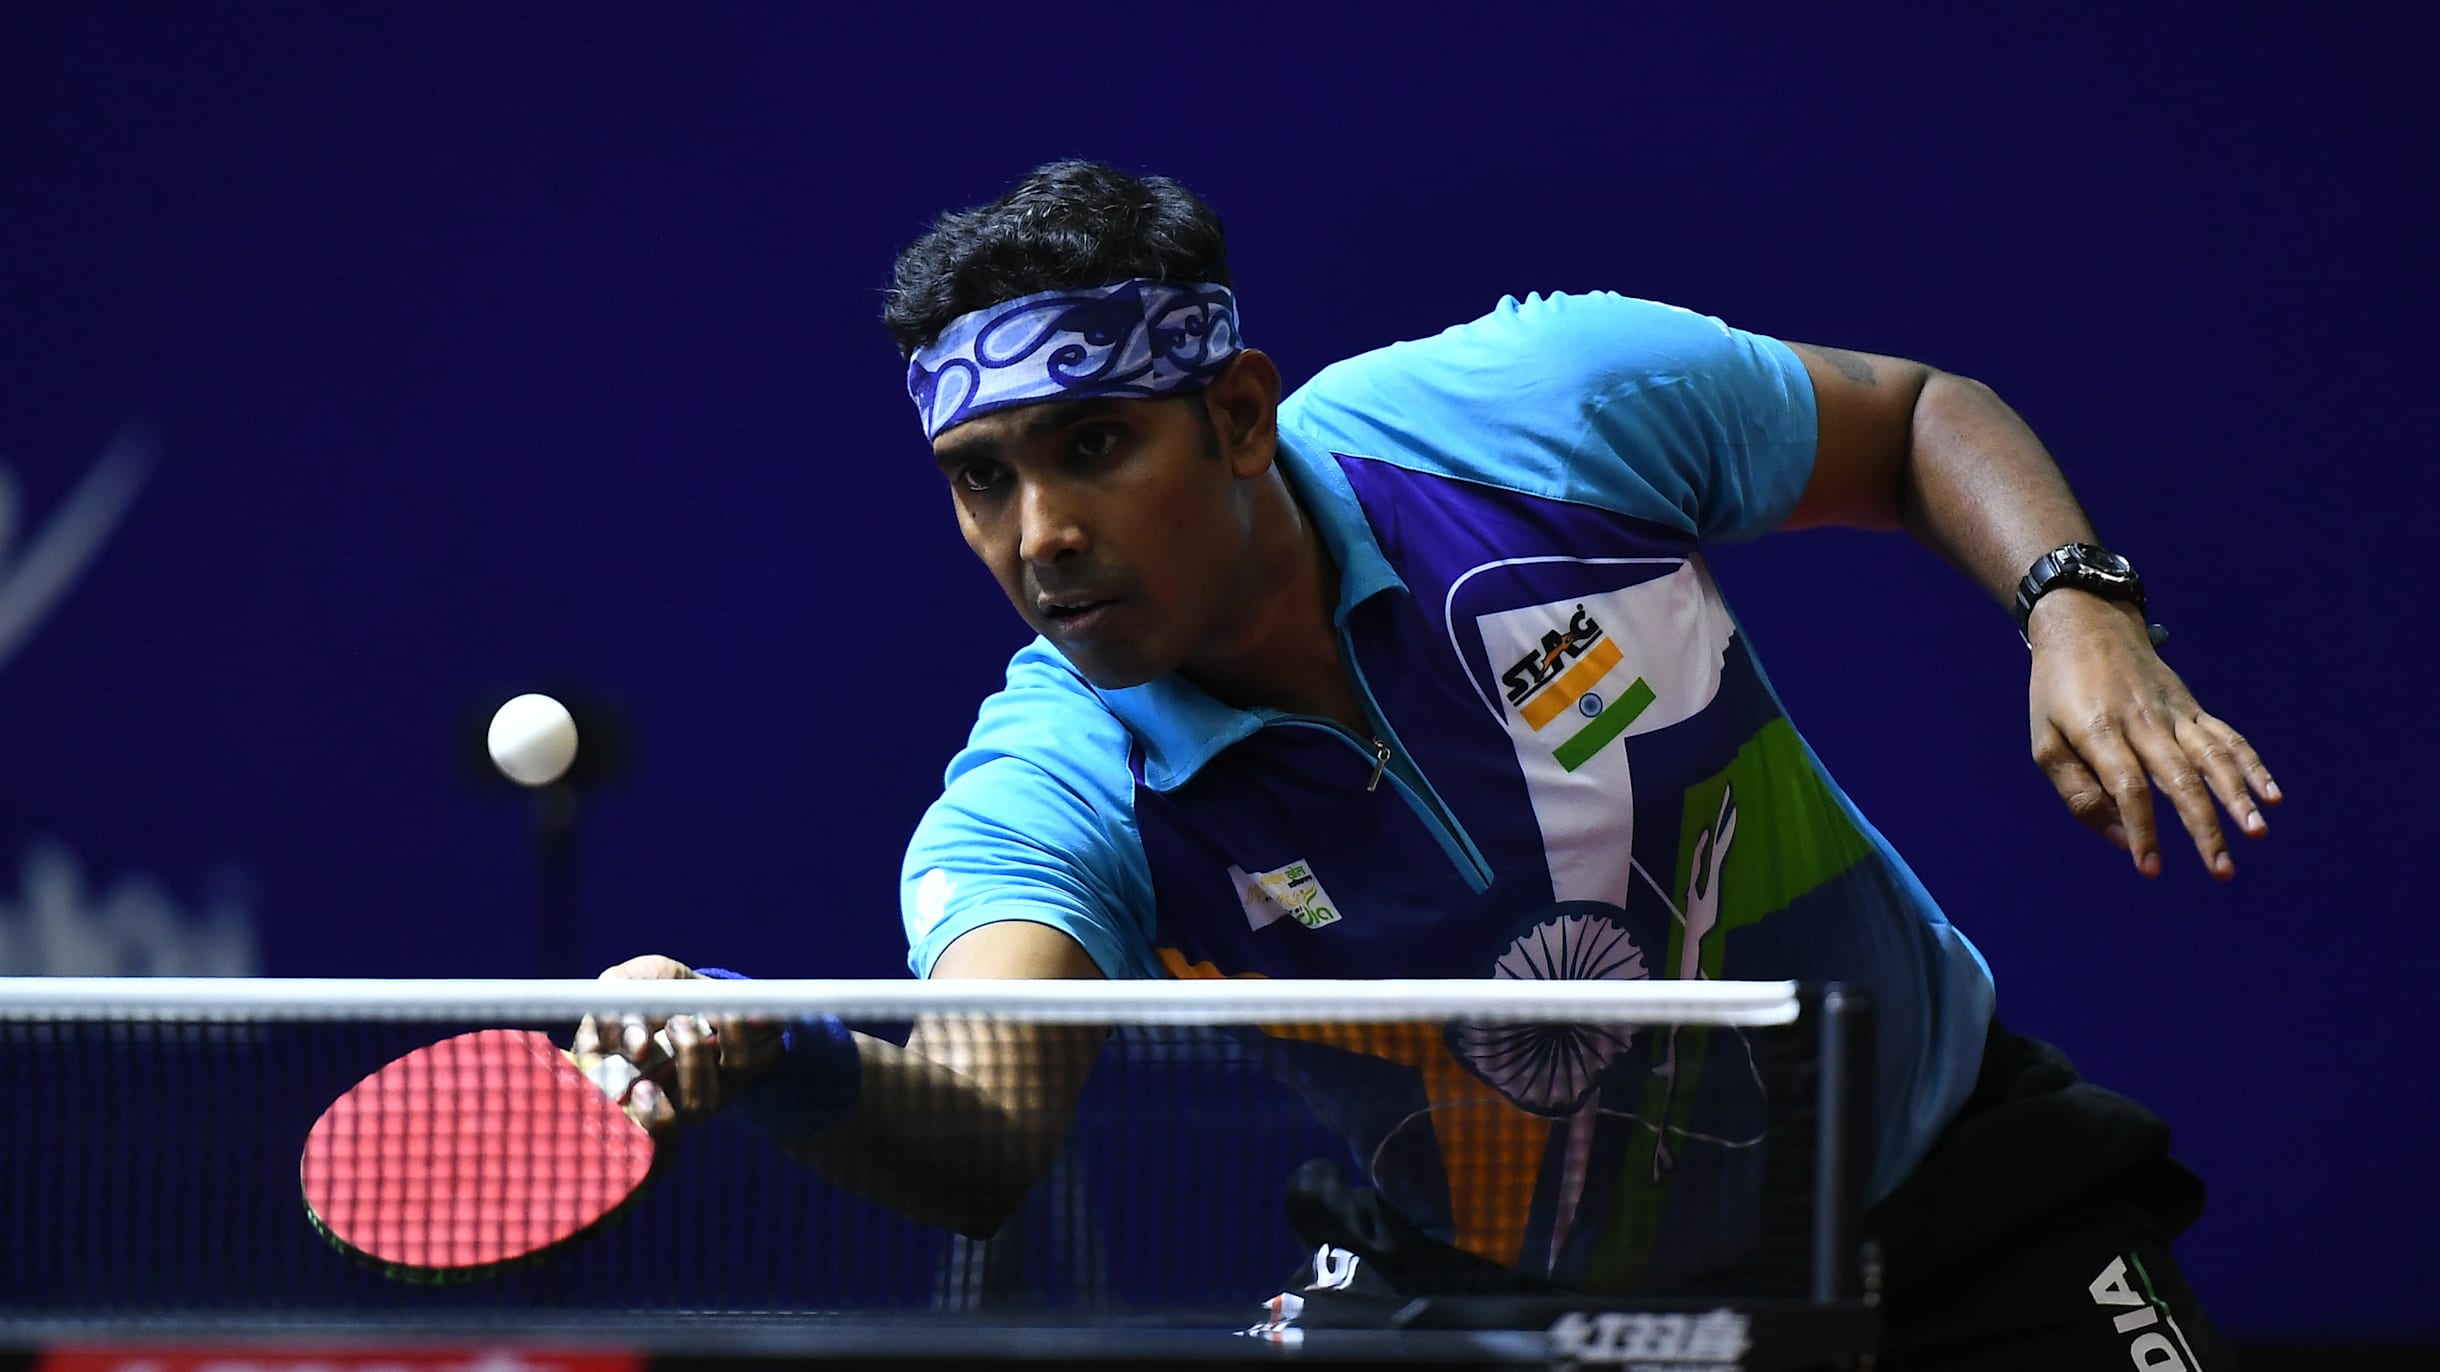 World Table Tennis Championships Finals 2021 Sharath Kamal, Manika Batra in action, watch live streaming and telecast in India